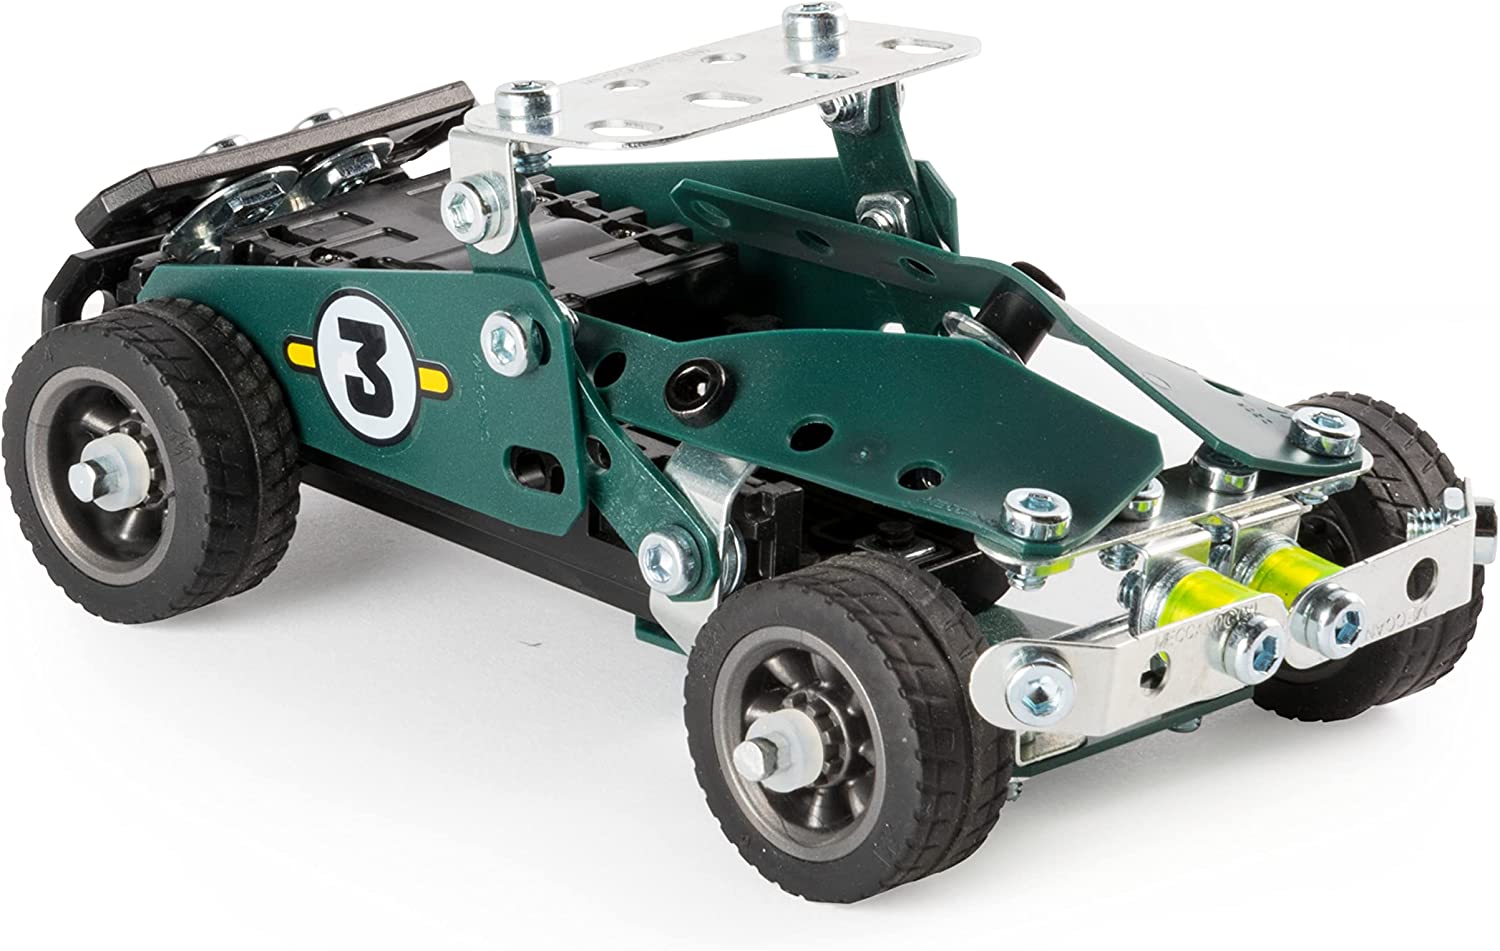 Meccano Junior Pull Back Buggy - West Side Kids Inc